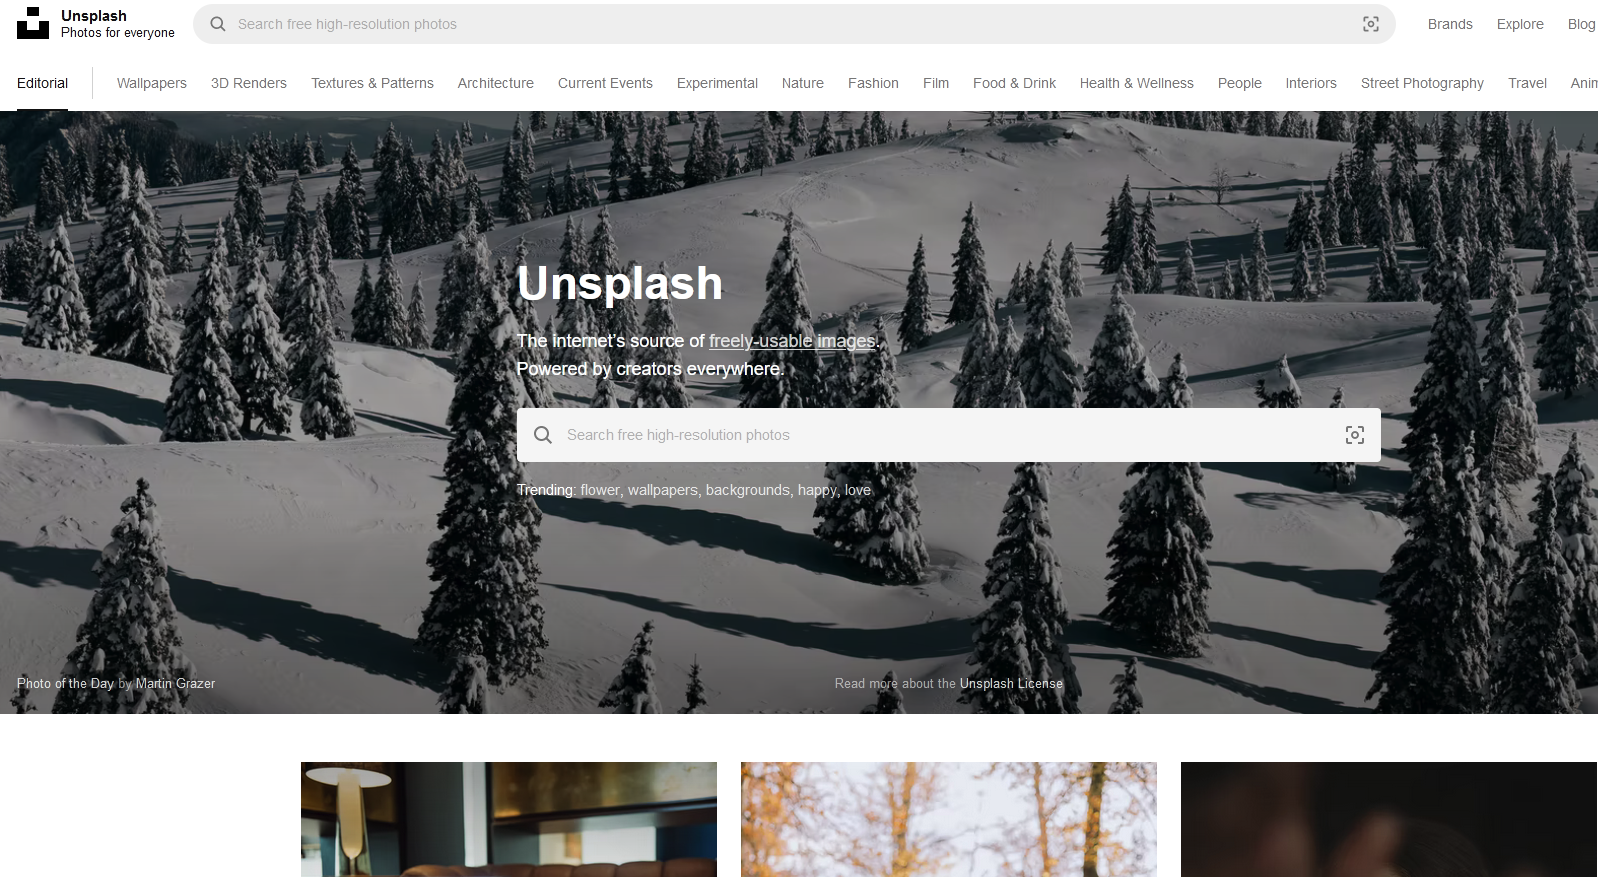 underrated websites  - winter - Unsplash Photowy E Biog Brno Expre Editor Wie Current P Art Unsplash The hemets source of reusable Powered by creators everywhere! Peg compong